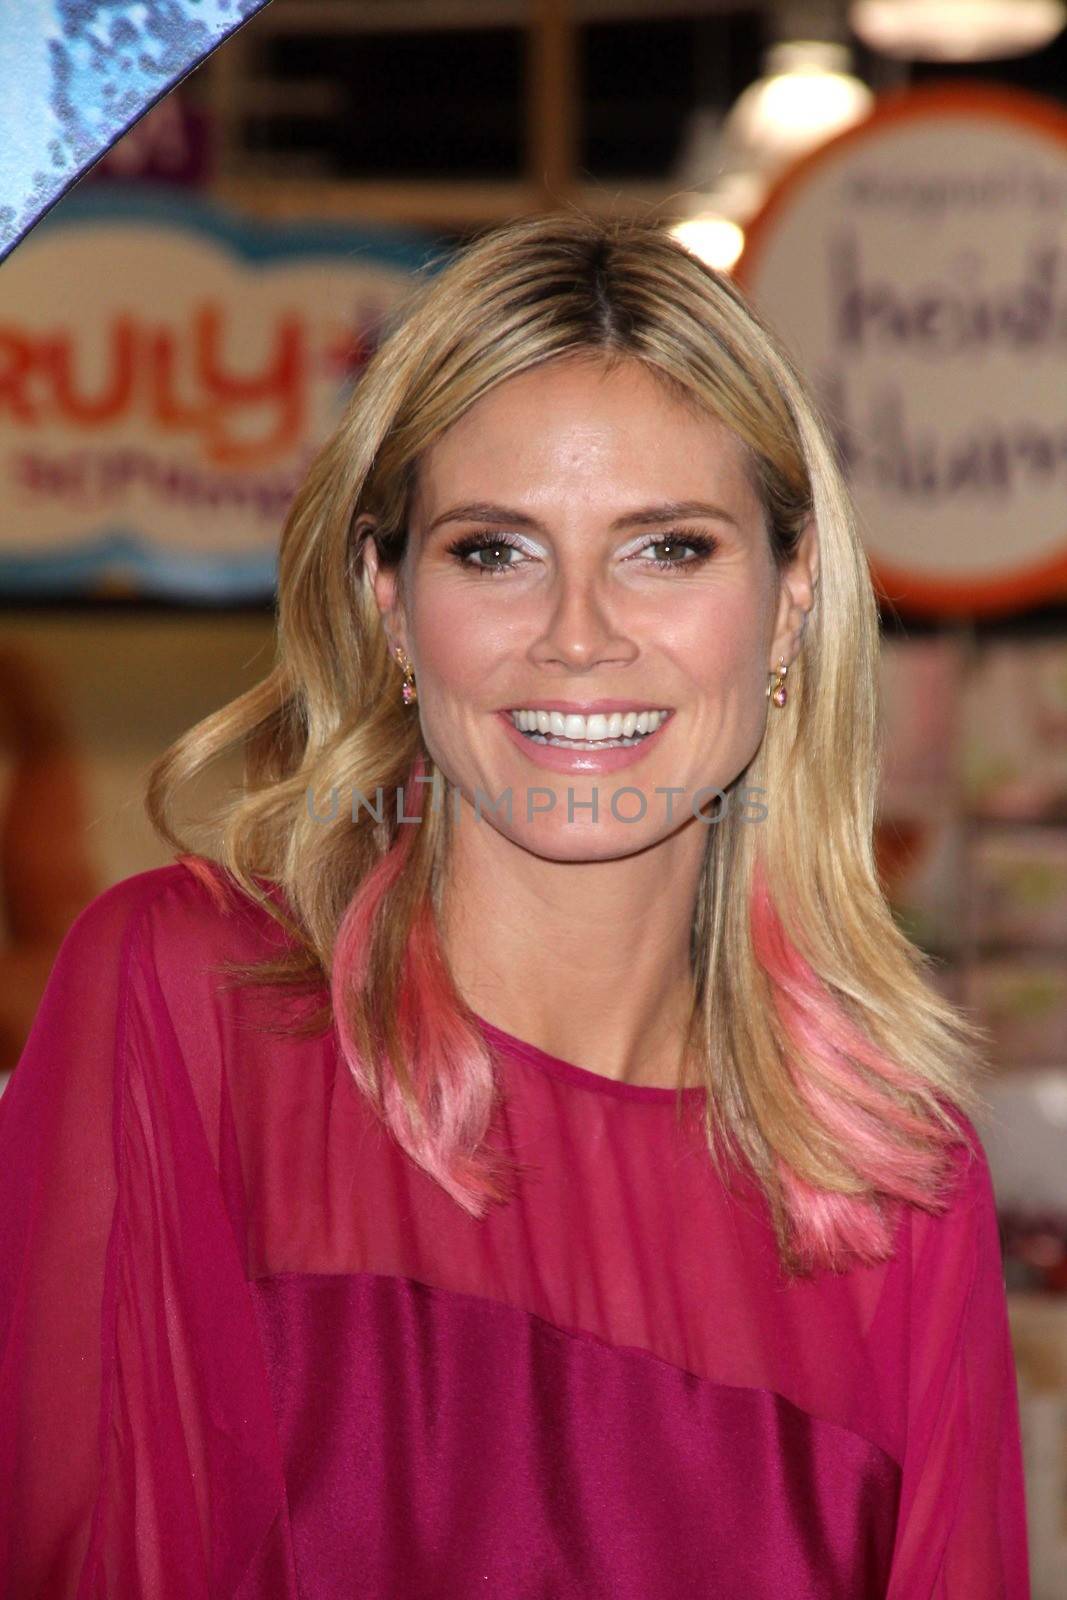 Heidi Klum at her "Truly Scrumptious" Collection Launch, Babies "R" Us, Calabasas, CA 09-14-12/ImageCollect by ImageCollect